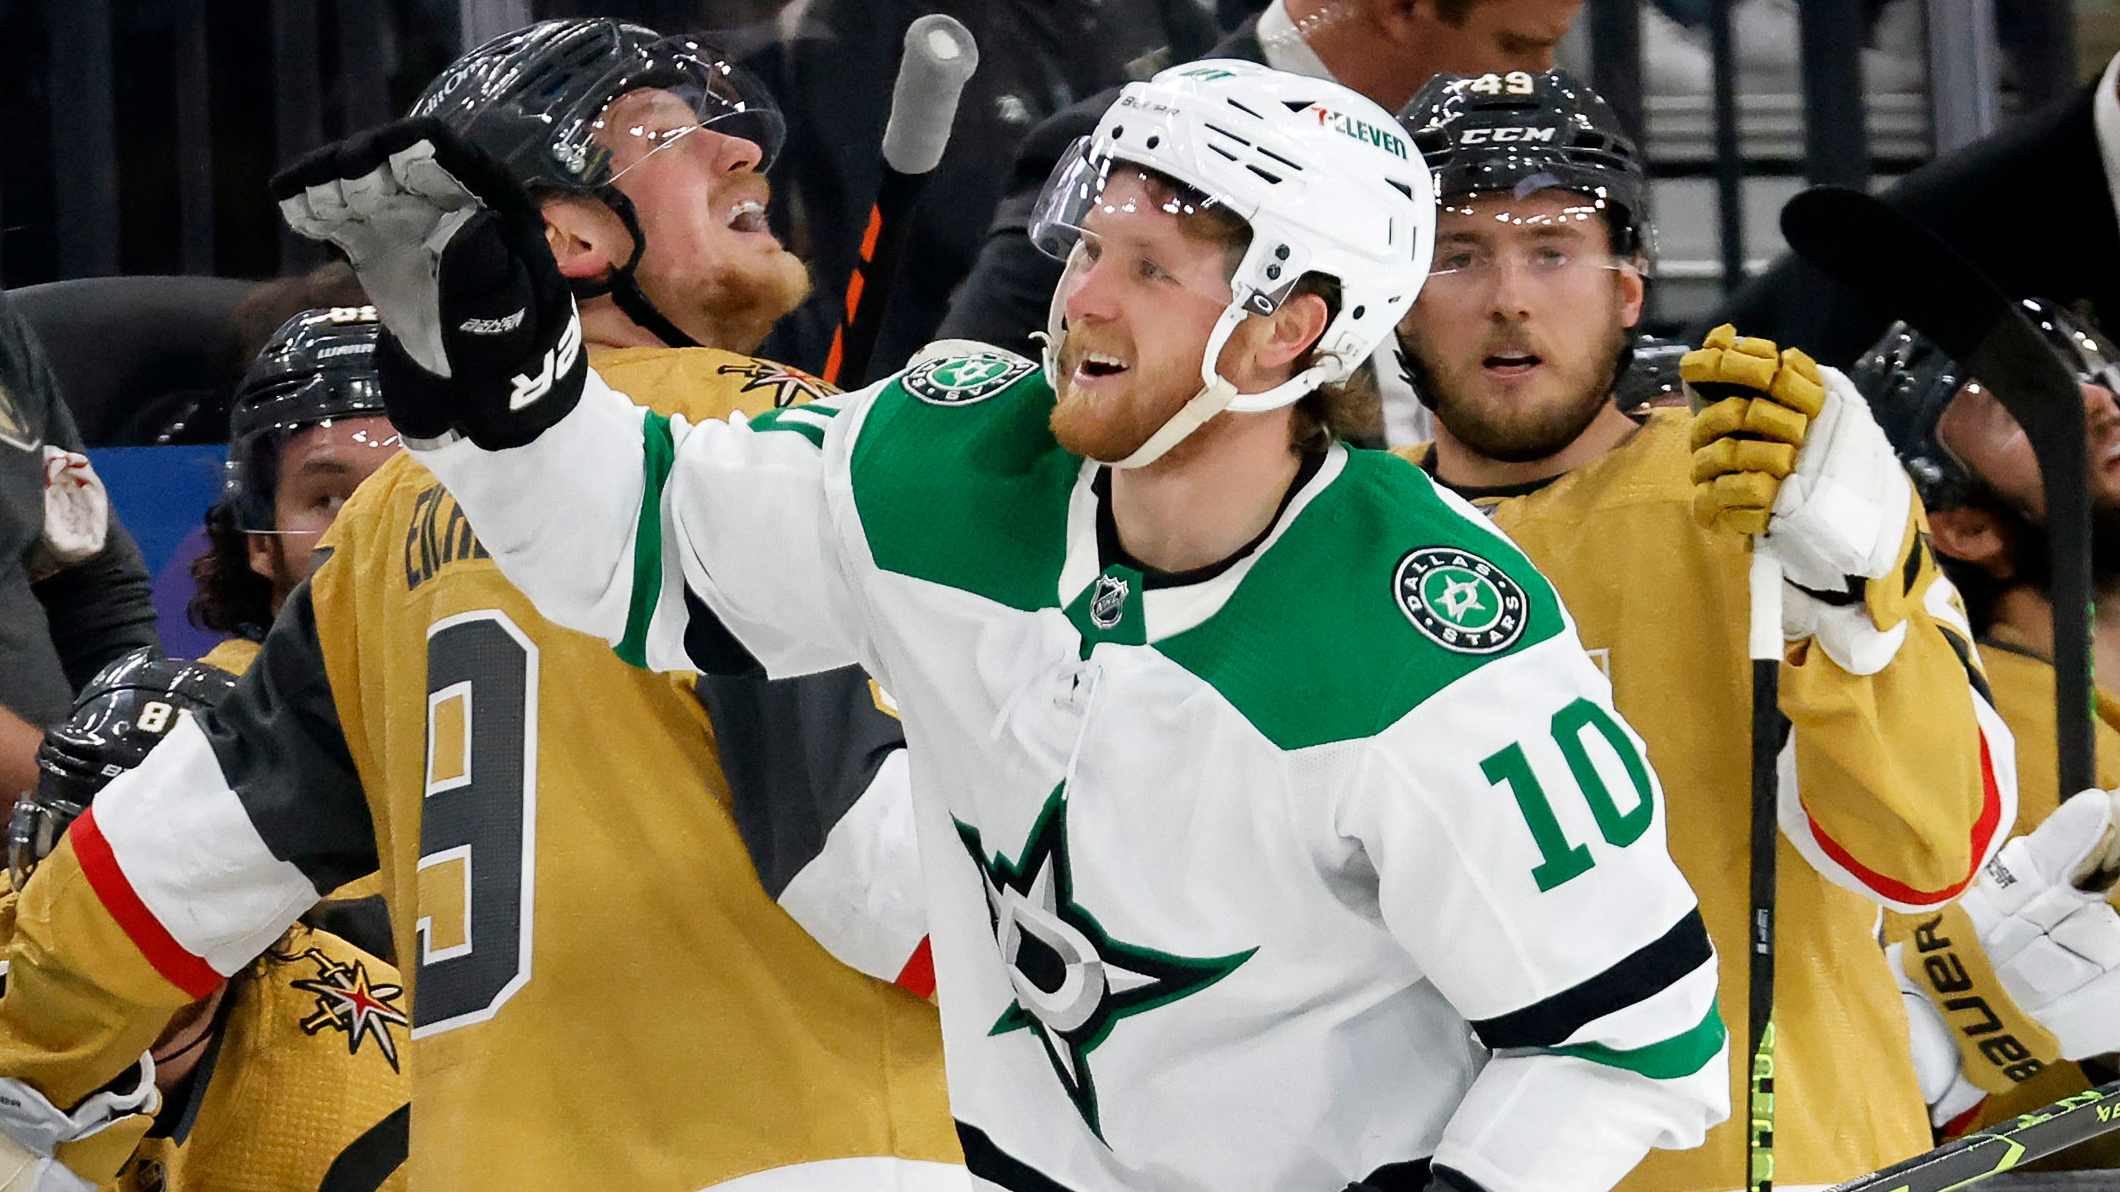 Photos: Stars debut blackout uniforms, Ty Dellandrea celebrates first NHL  goal in win vs. Red Wings